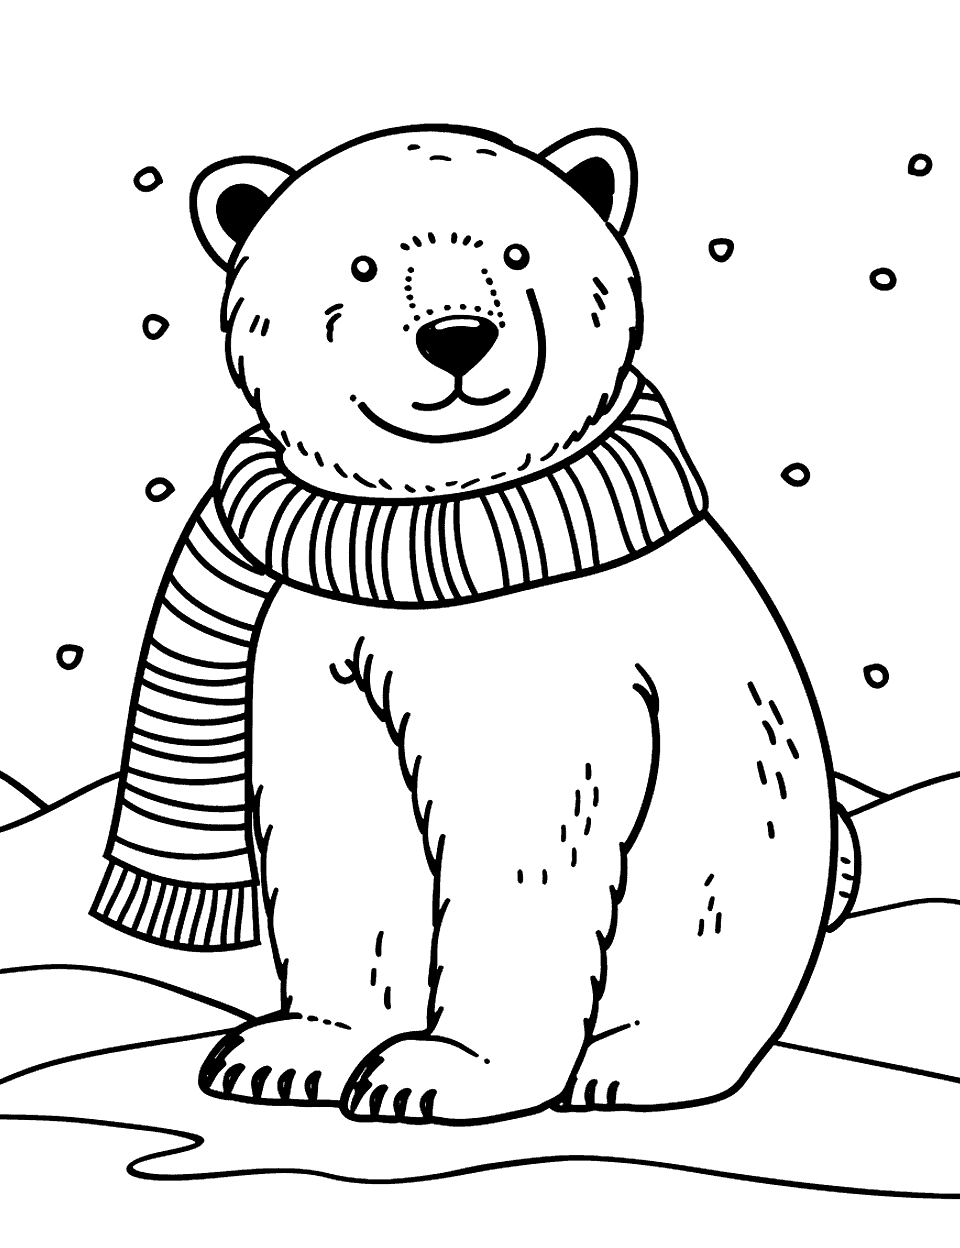 Cozy Polar Bear Coloring Page - A polar bear wrapped in a knitted scarf, looking warm.